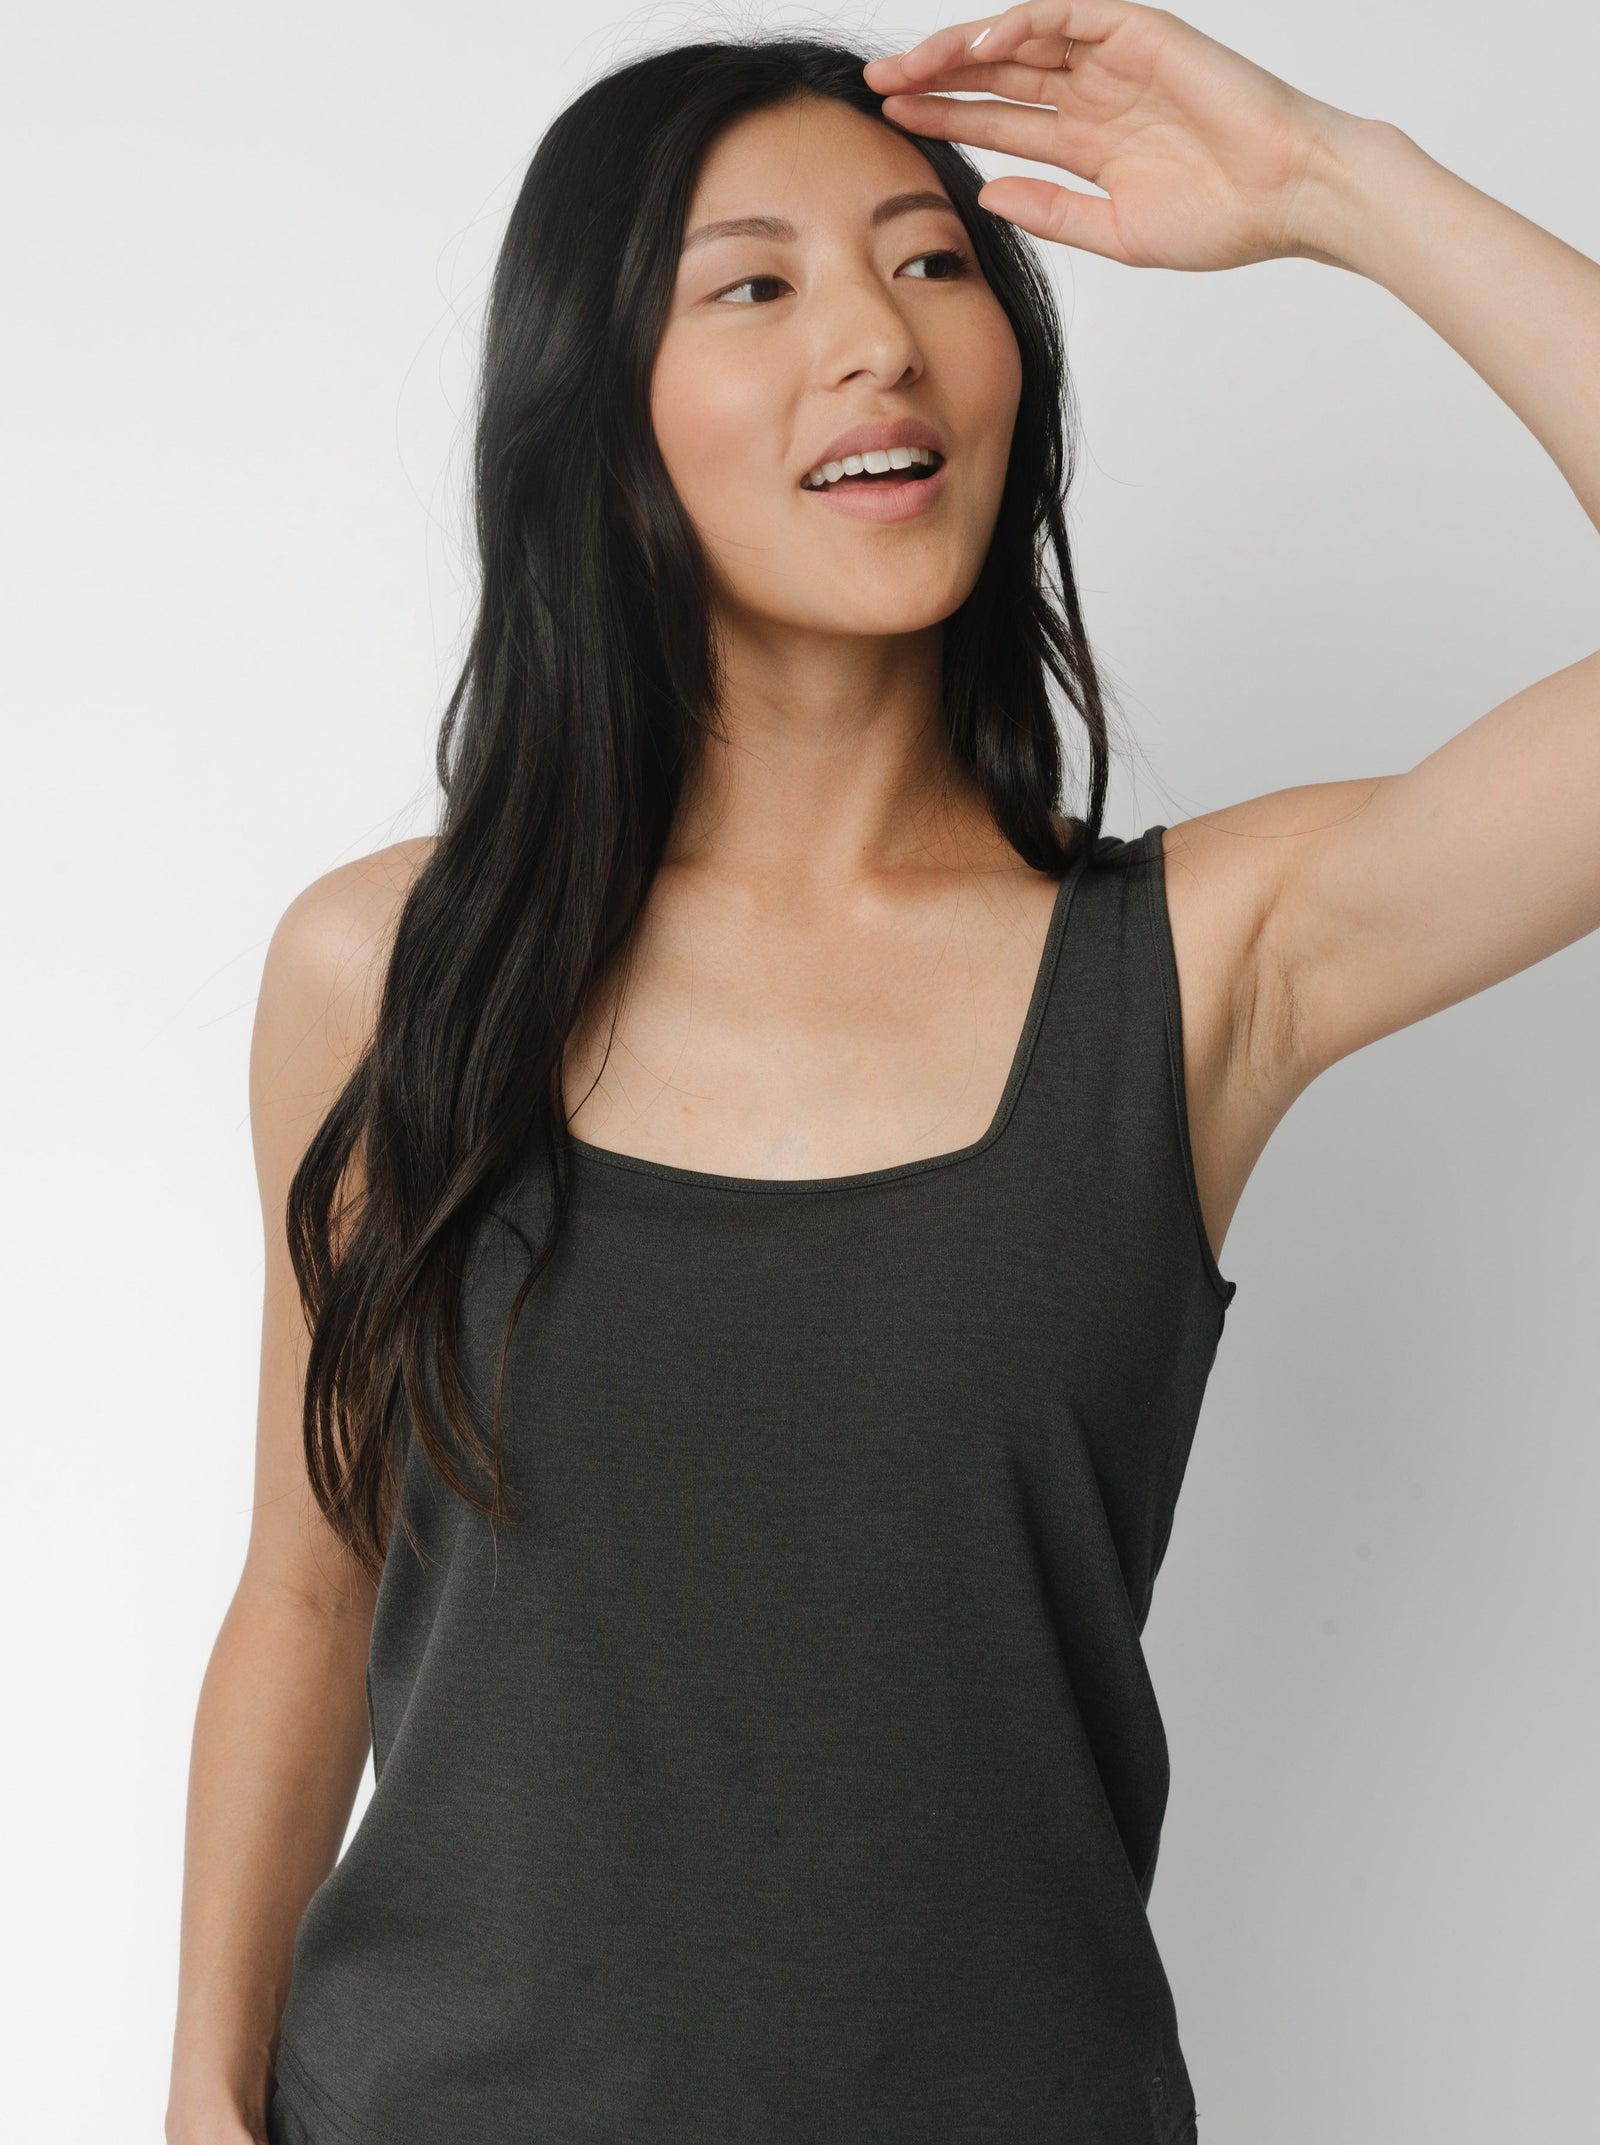 Charcoal Women’s Ultra-Soft Bamboo Square Neck Tank